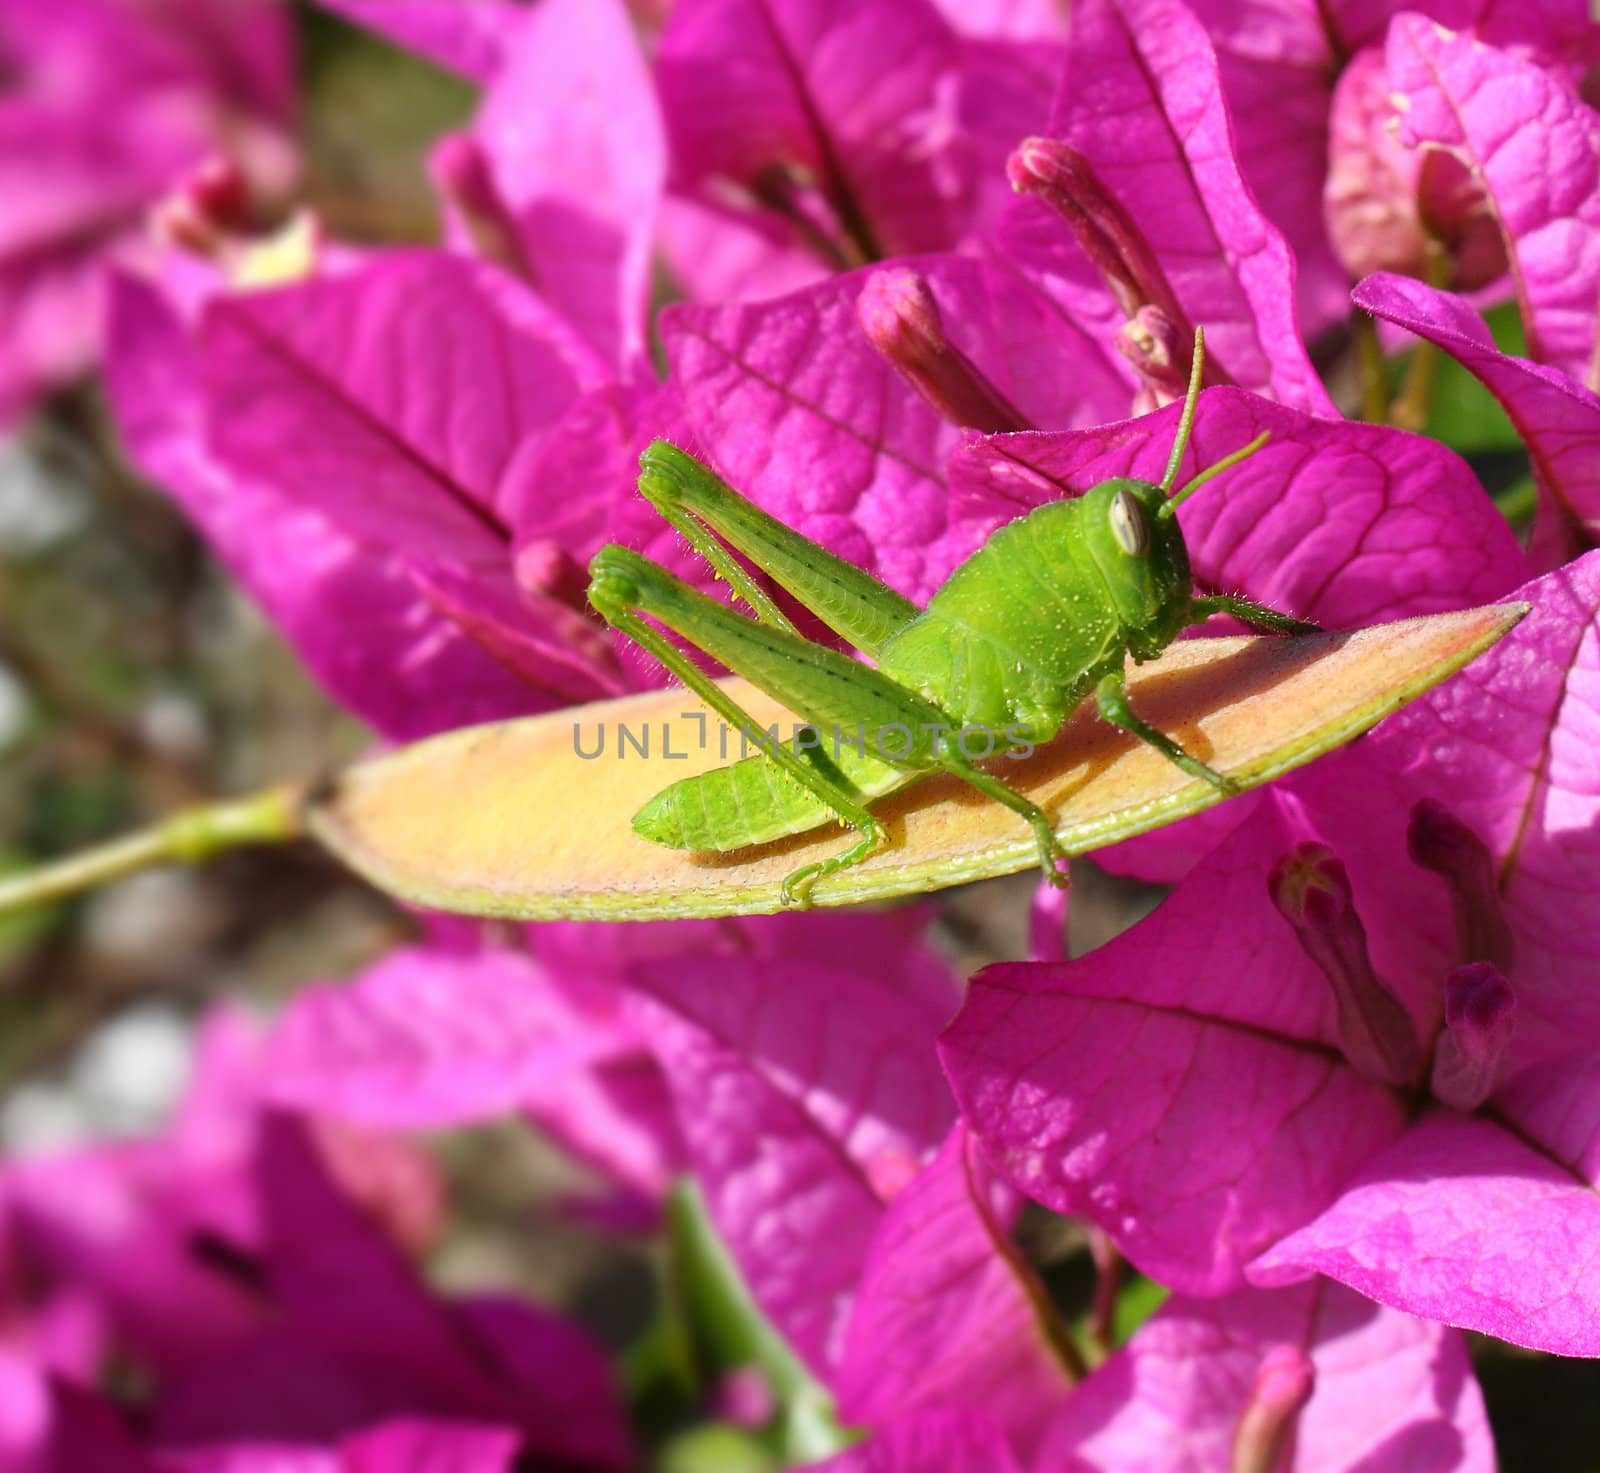 A close up of a green grasshopper perched on a cassia seed pod in front of magenta bougainvillea flowers in bright sunshine. Taken in the early Spring.